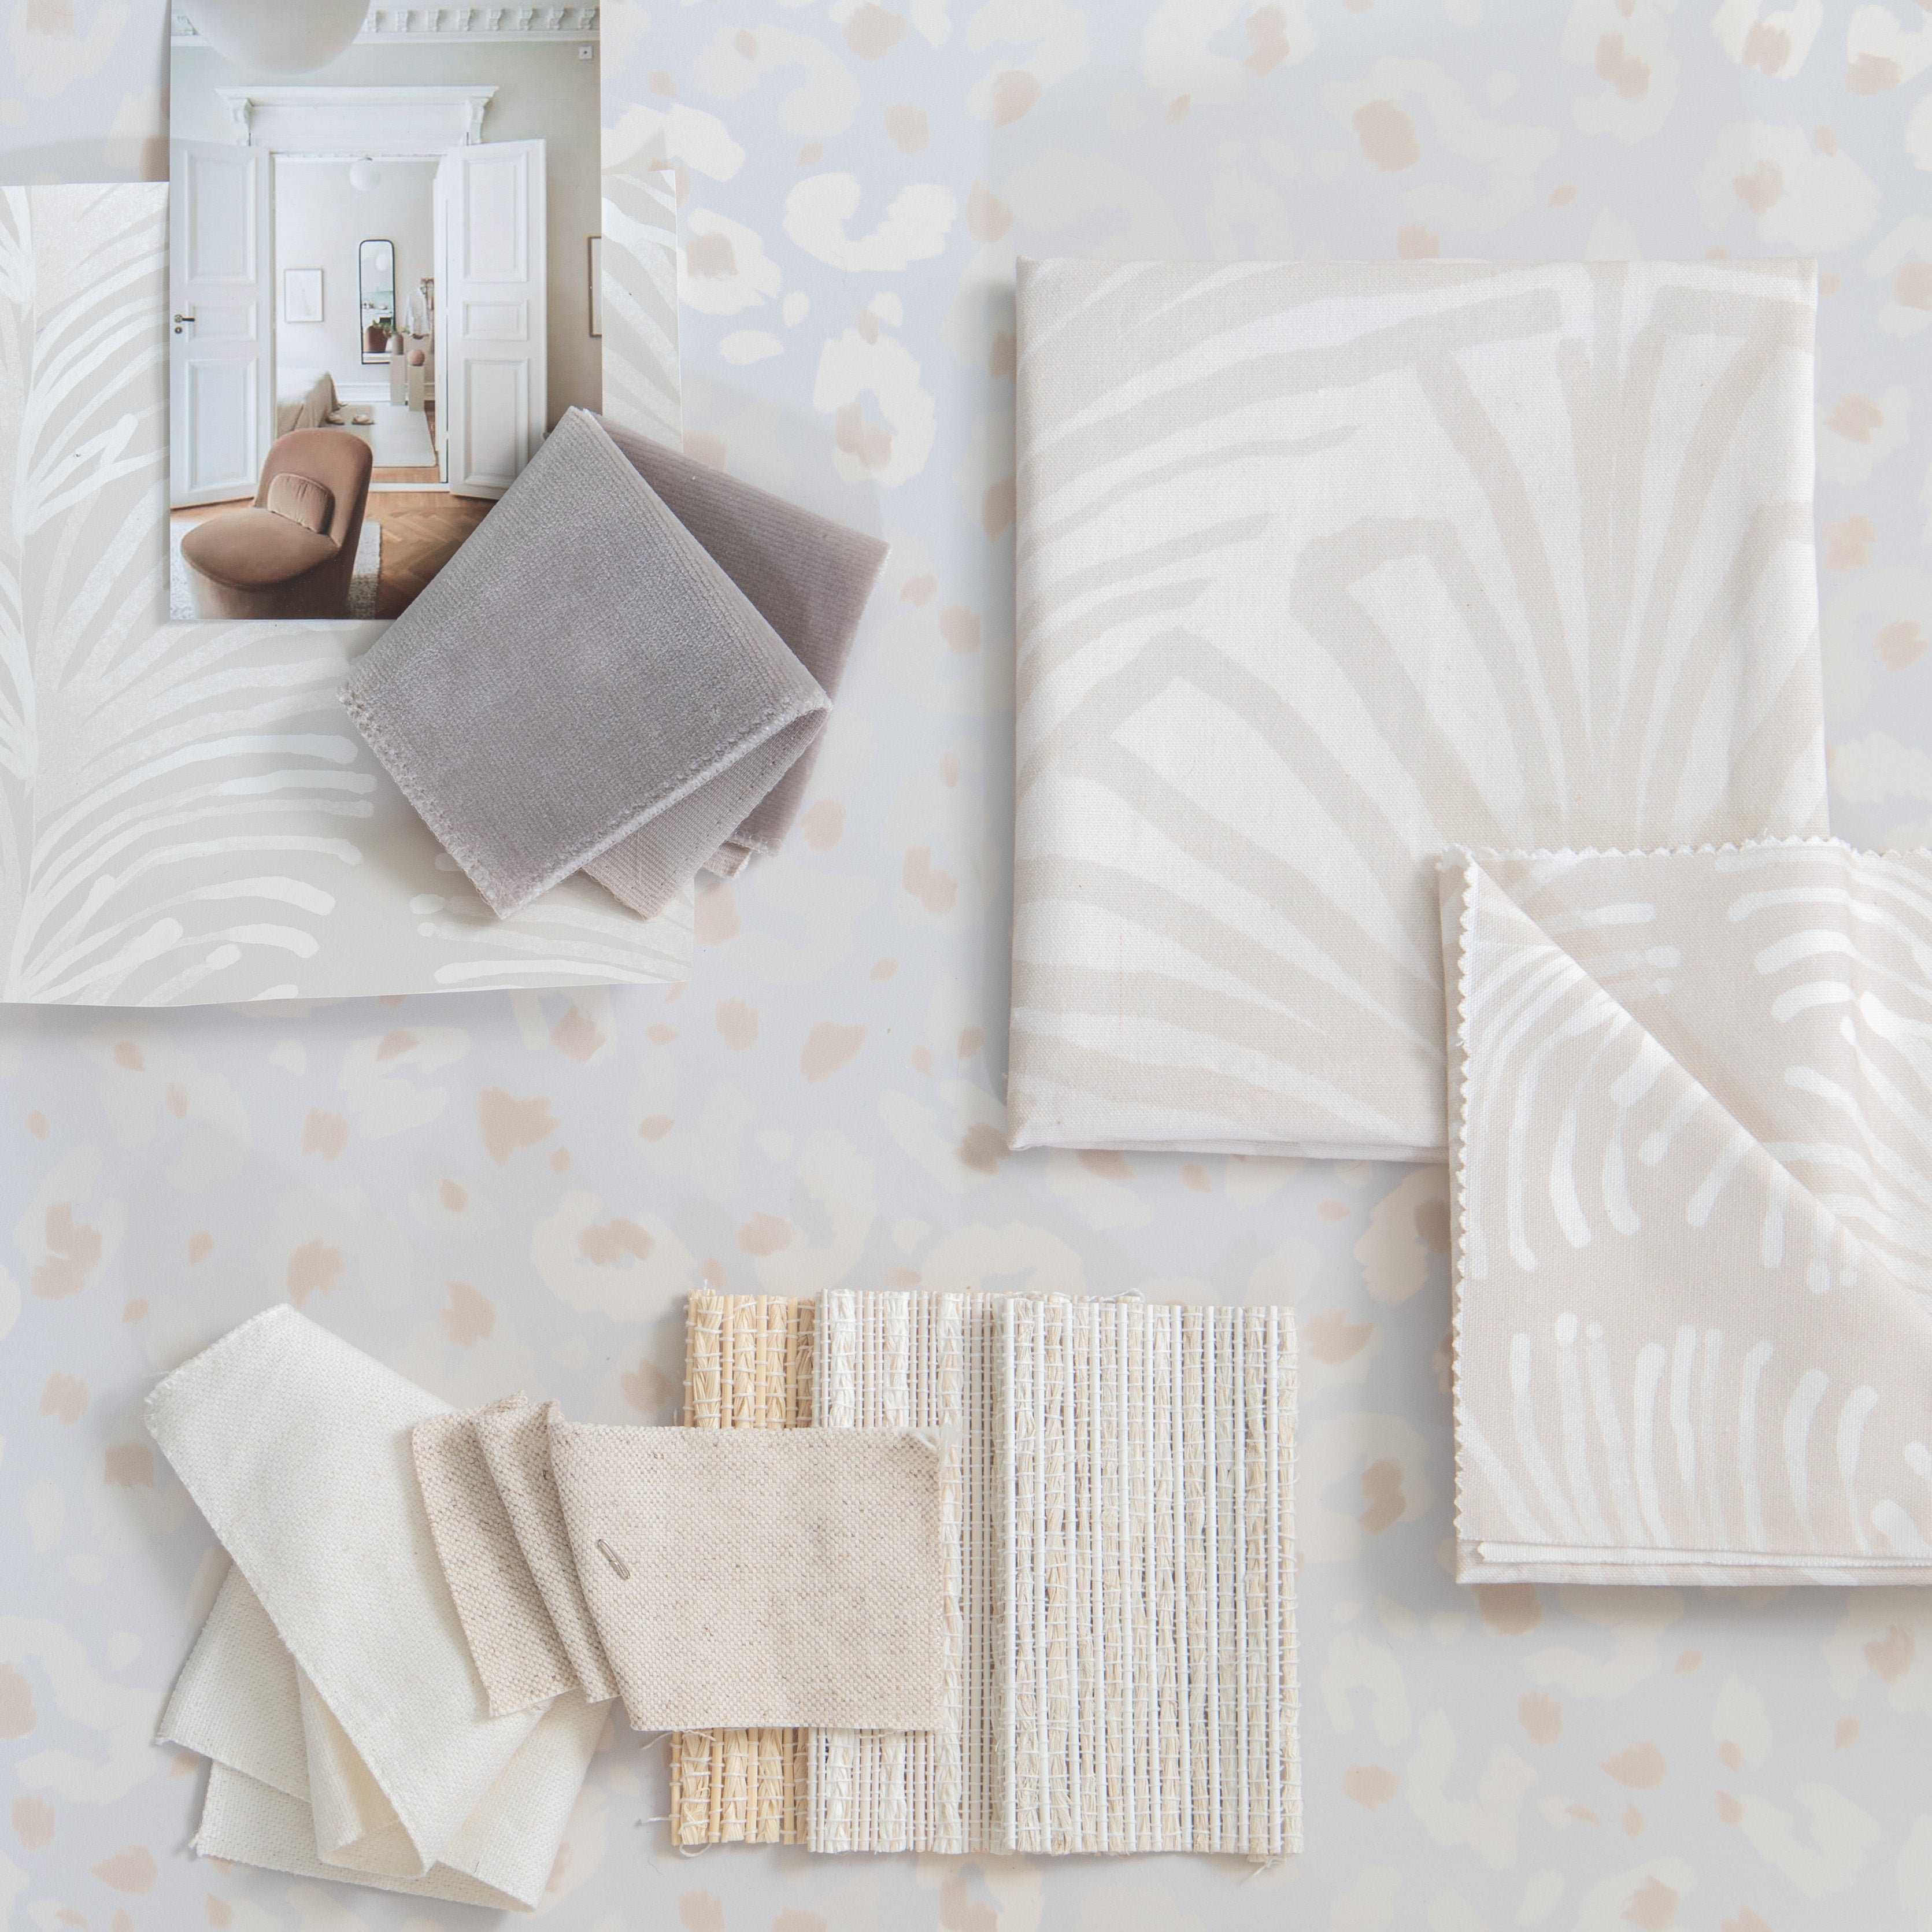 Interior design moodboard and fabric inspirations with Beige Botanical Stripe Printed Swatch, Linen Oat Swatch, and Beige Chinoiserie Tiger Printed Swatch